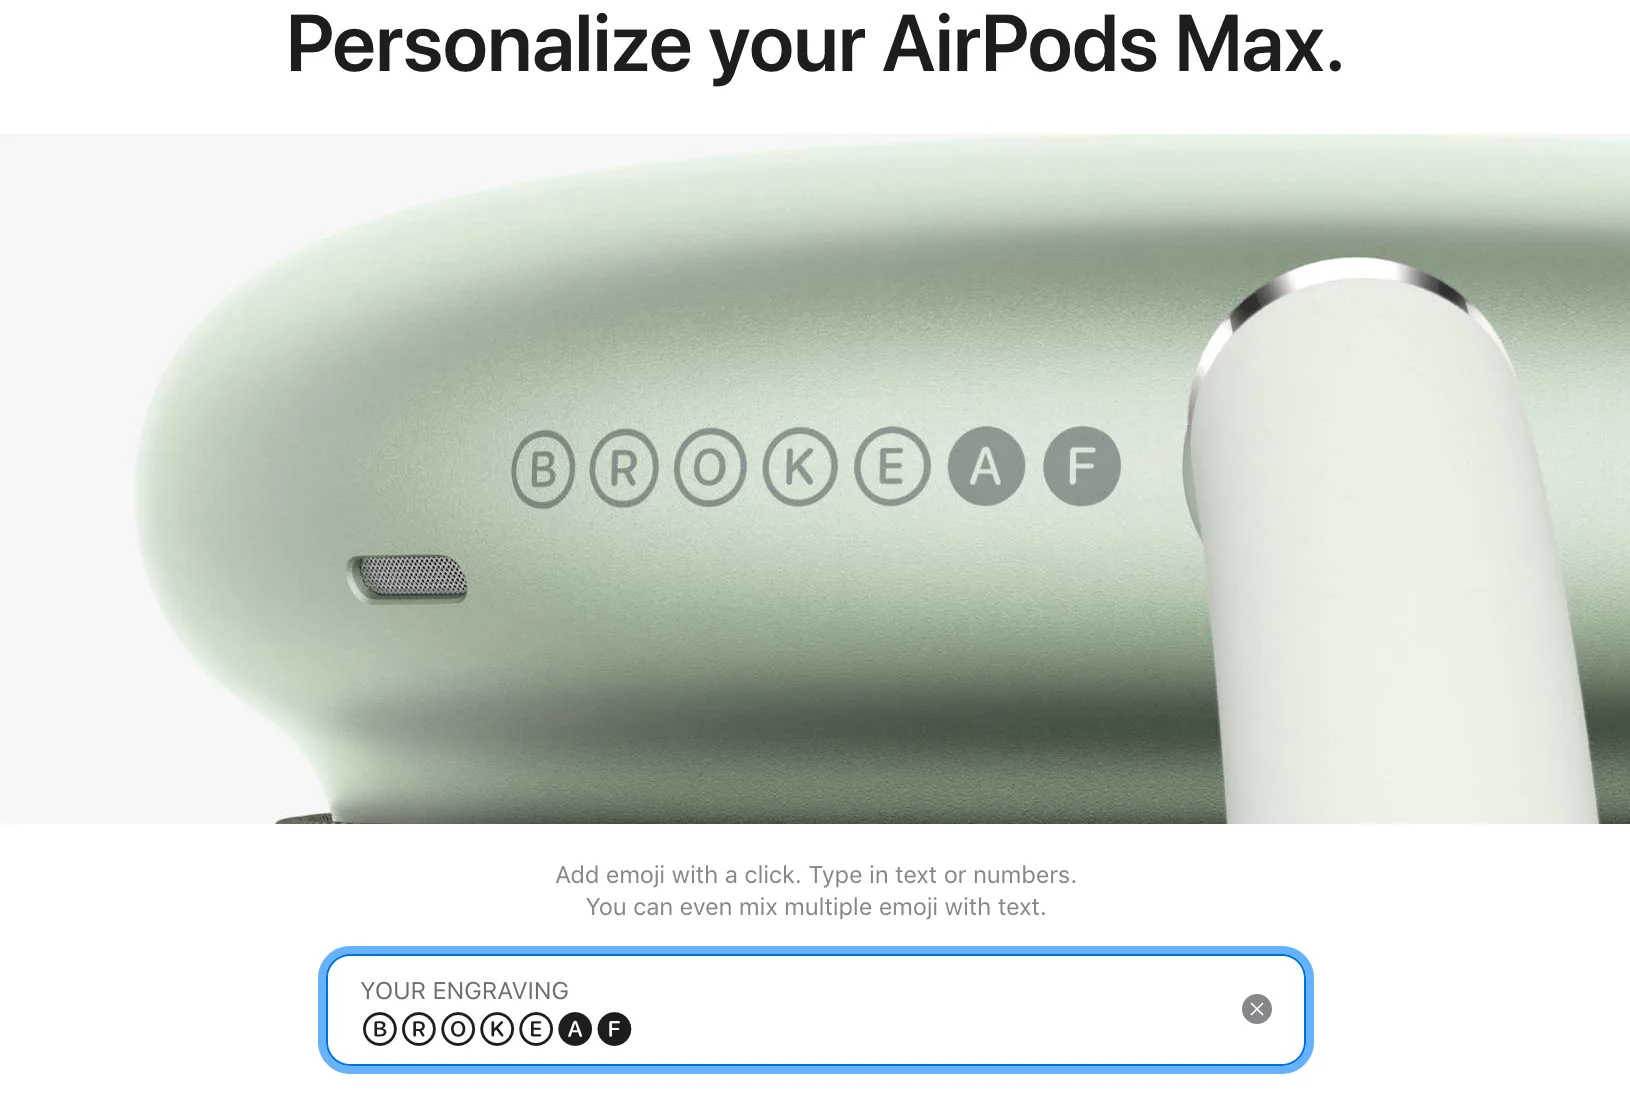 airpods max engraving